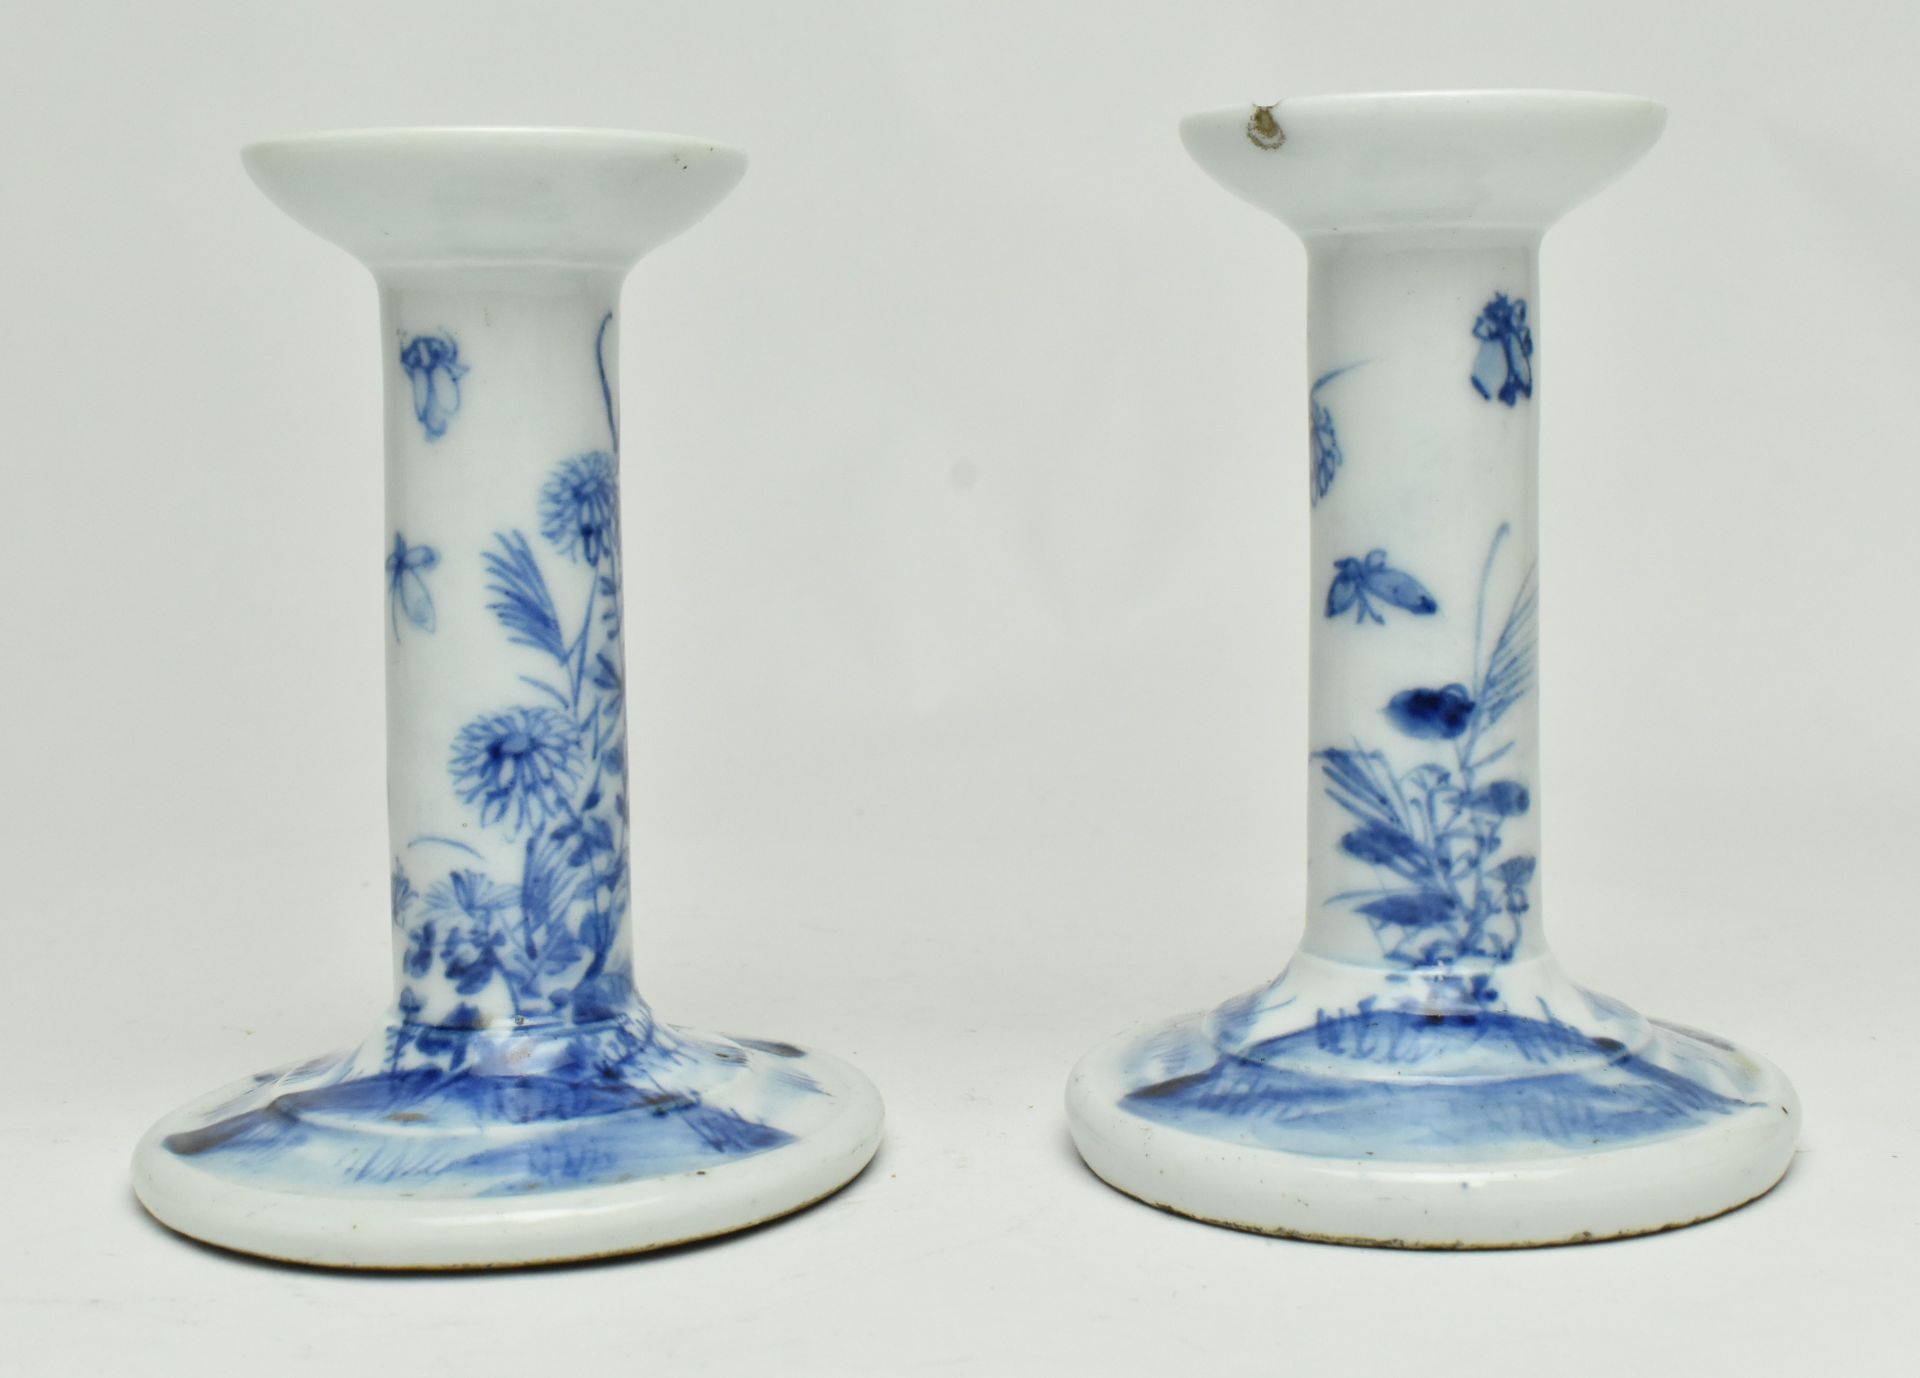 PAIR OF REPUBLIC BLUE AND WHITE CANDLE STICKS 民国青花烛台一对 - Image 2 of 7